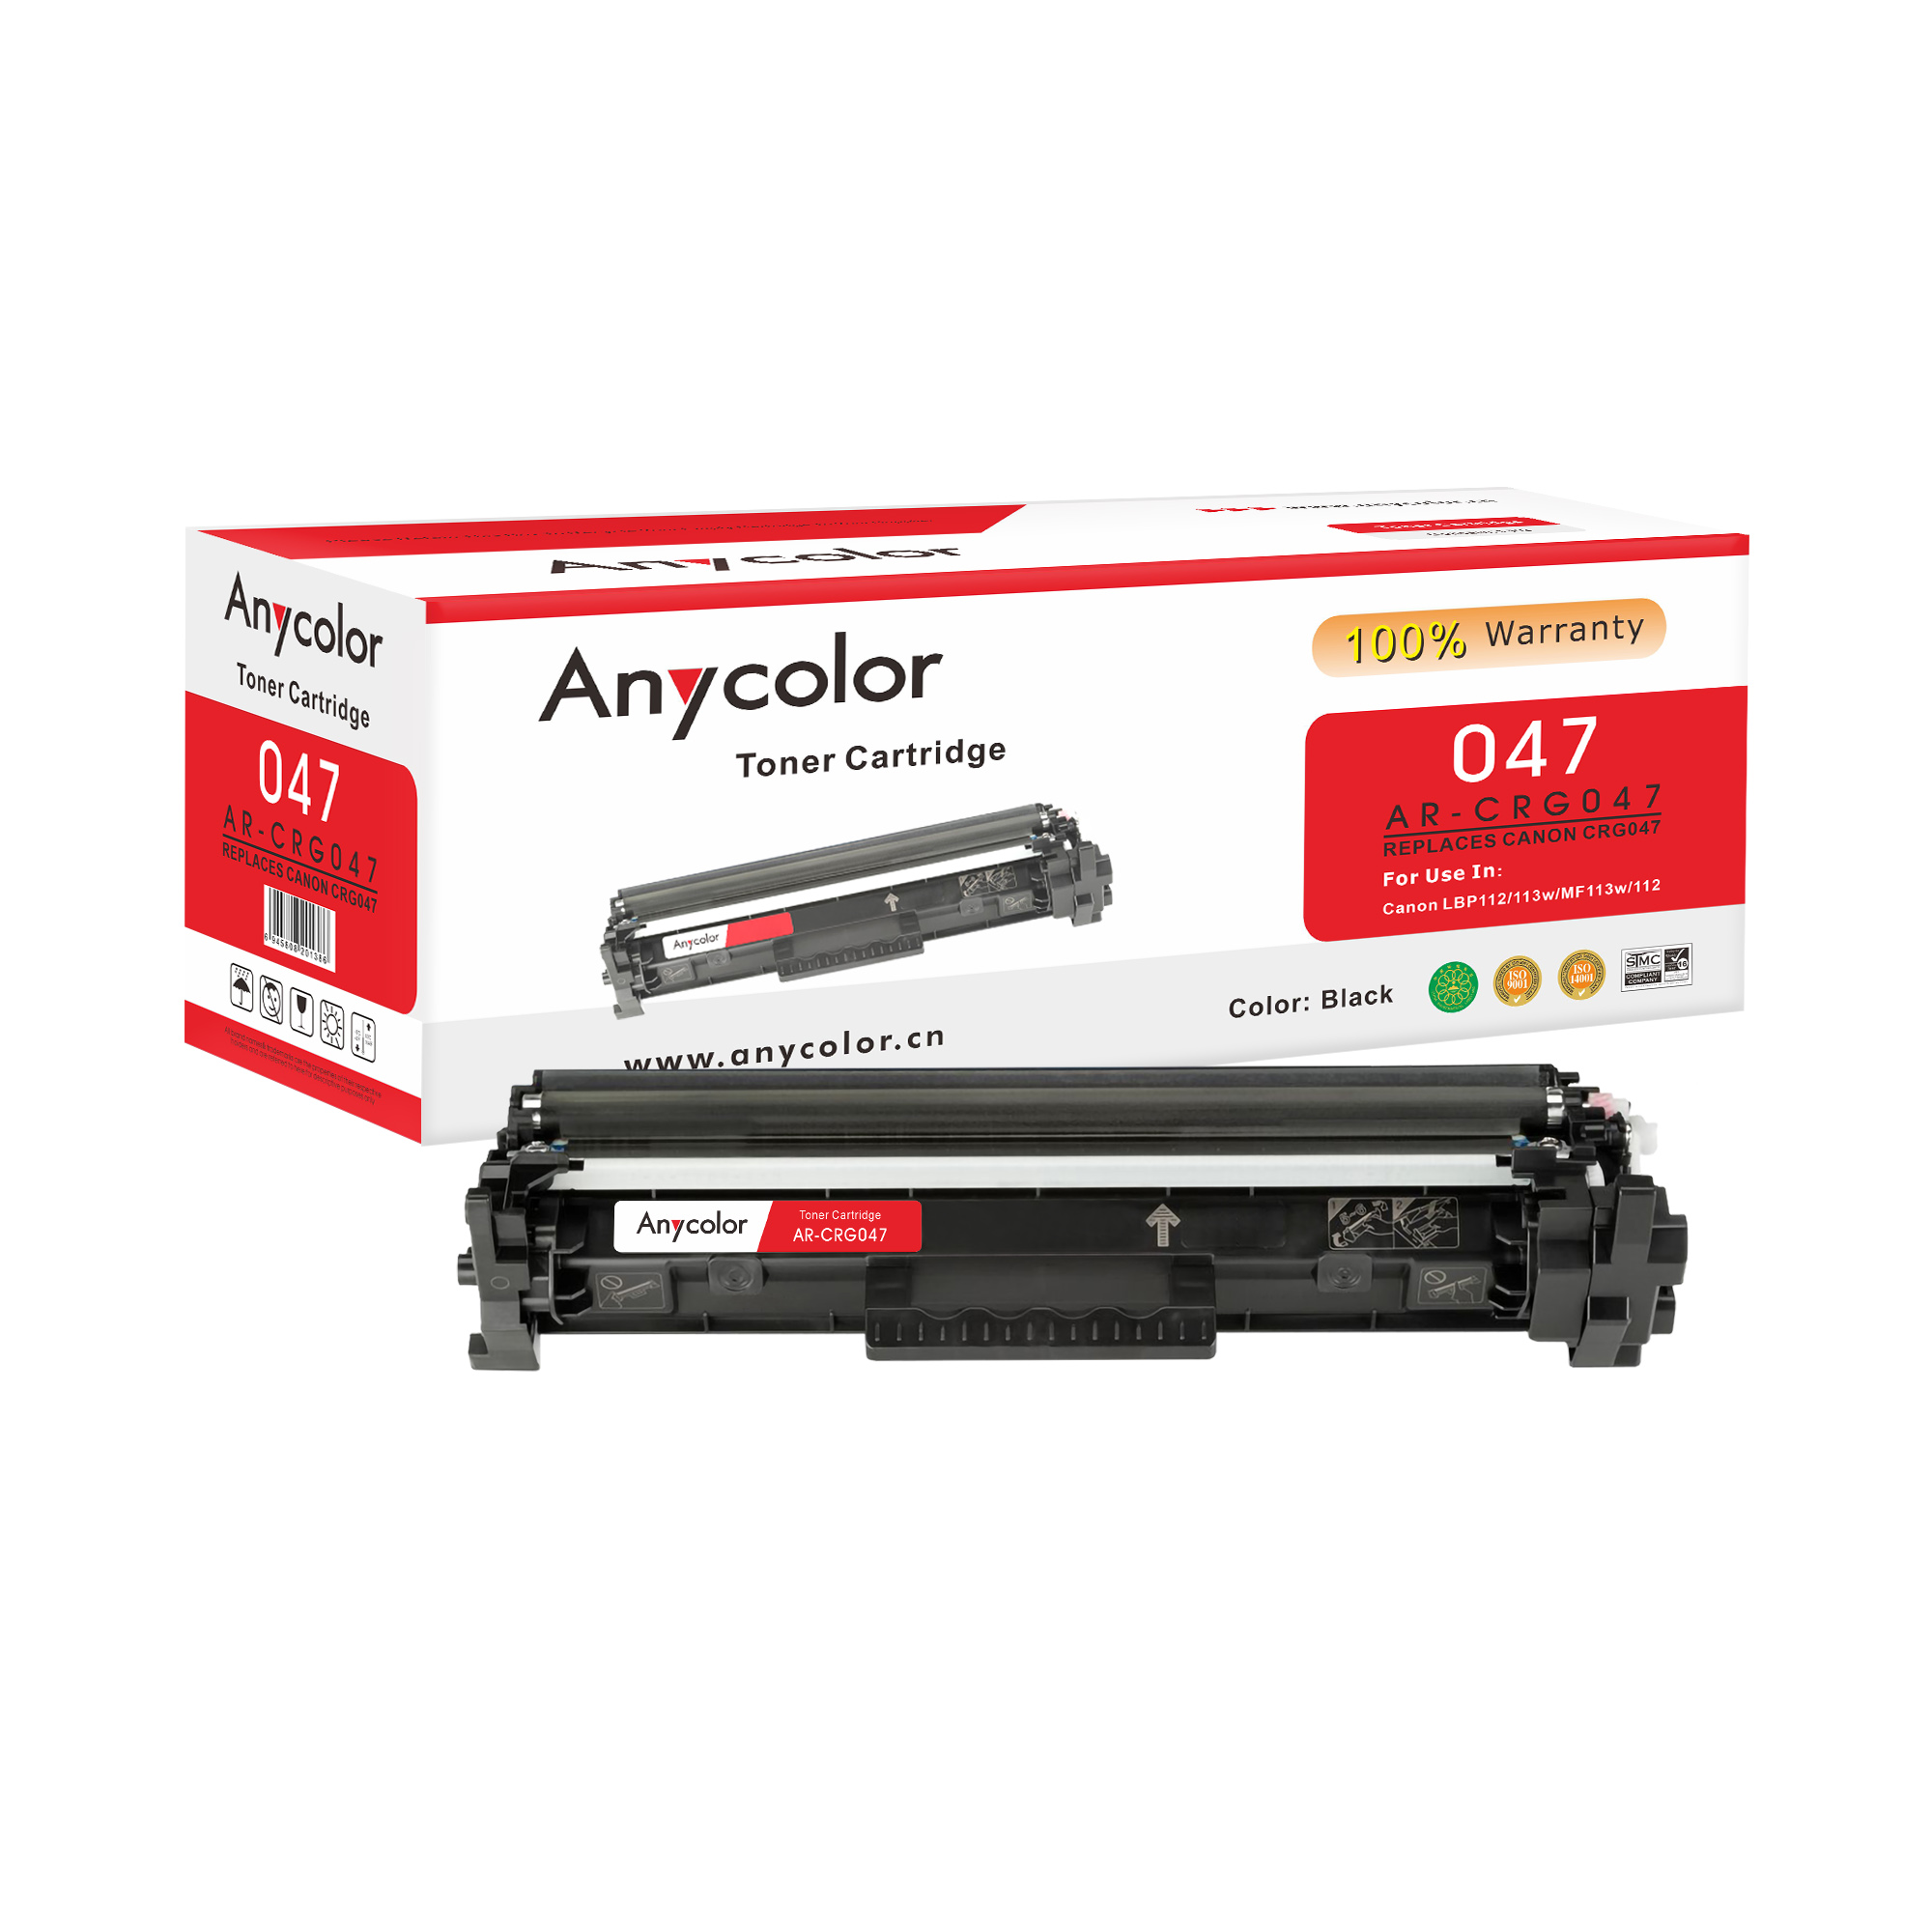 CANON Series--Anycolor Co.,Ltd